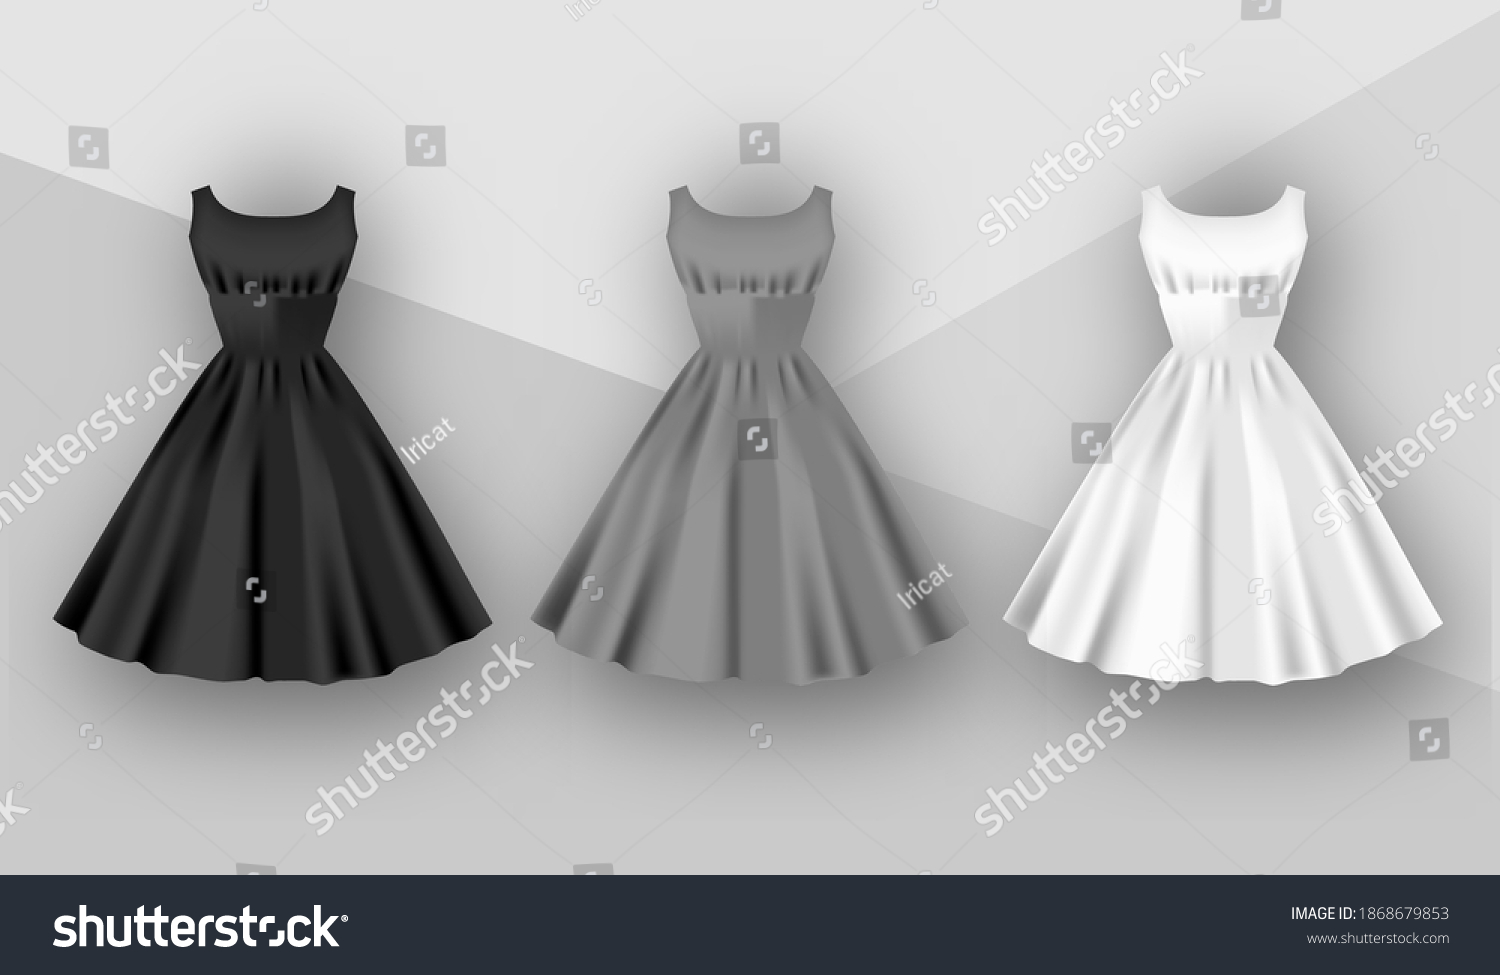 SVG of Female dresses mockup collection. Dress with puffy skirt with pleats. Realistic Festive 3d dress without sleeves. White, gray and black variation isolated on a grey background. Vector illustration svg